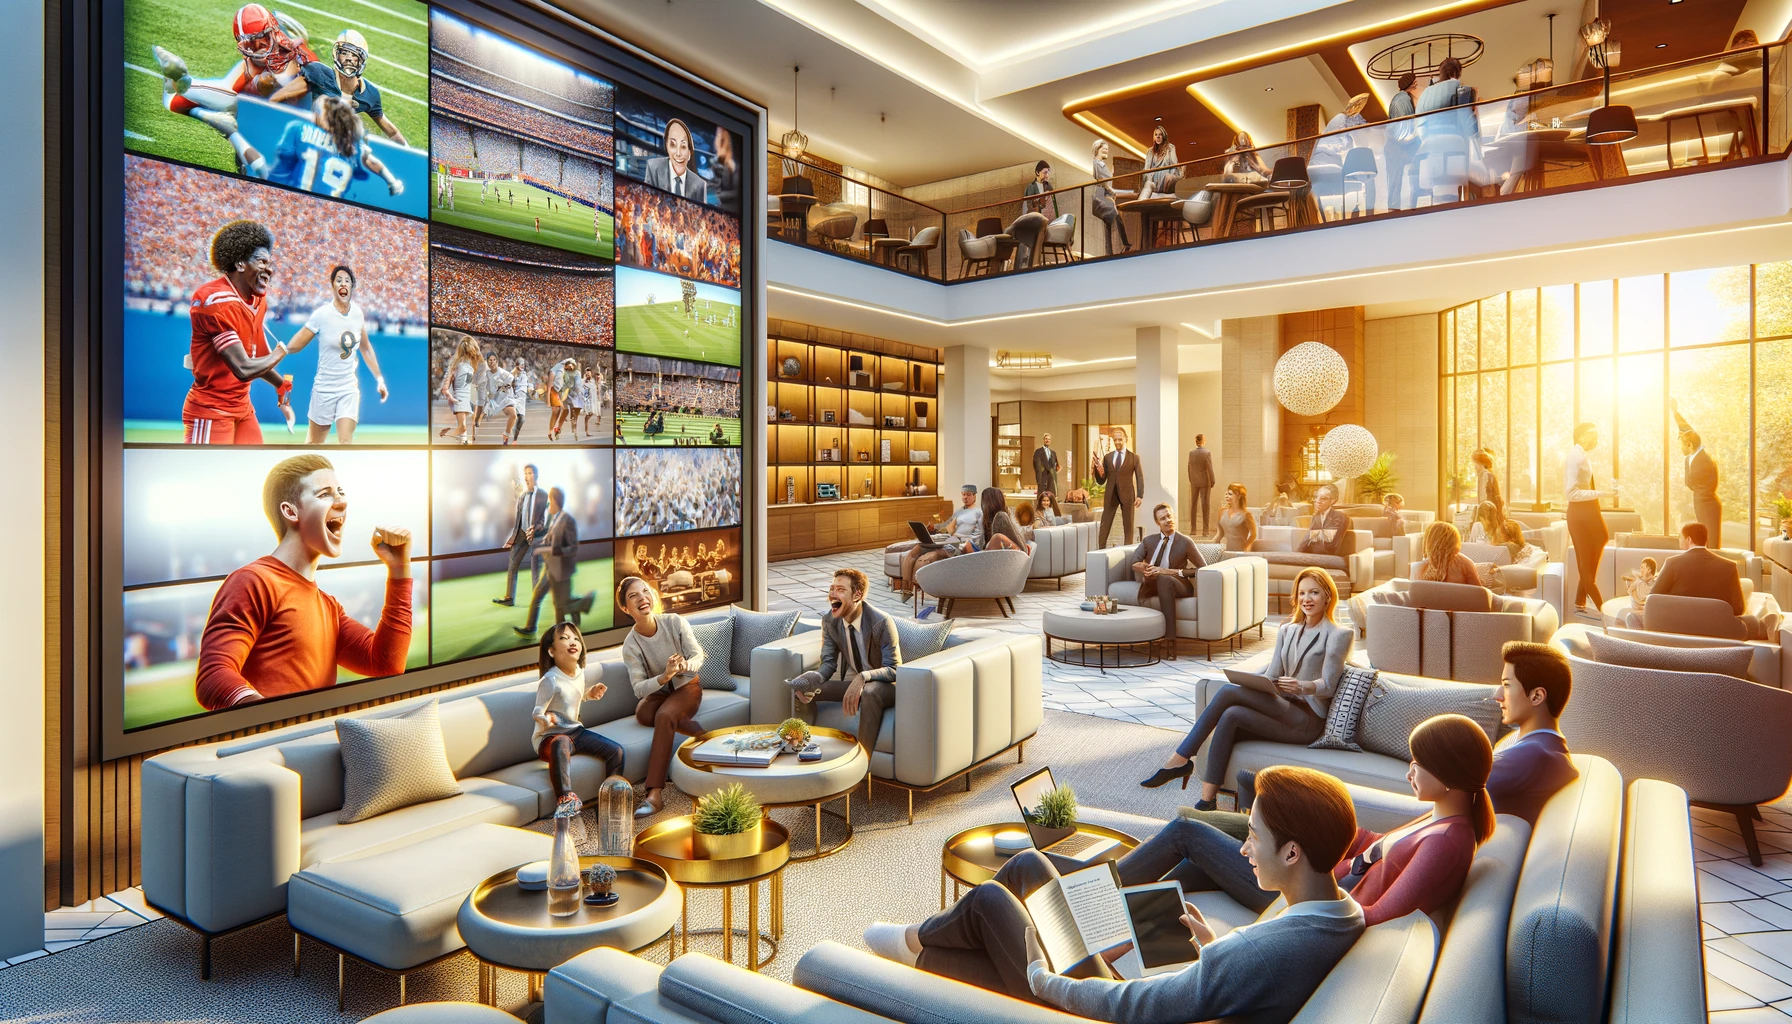 Modern, bright hotel with guests enjoying sports on a screen, educational program on a tablet, and lecture on a laptop.